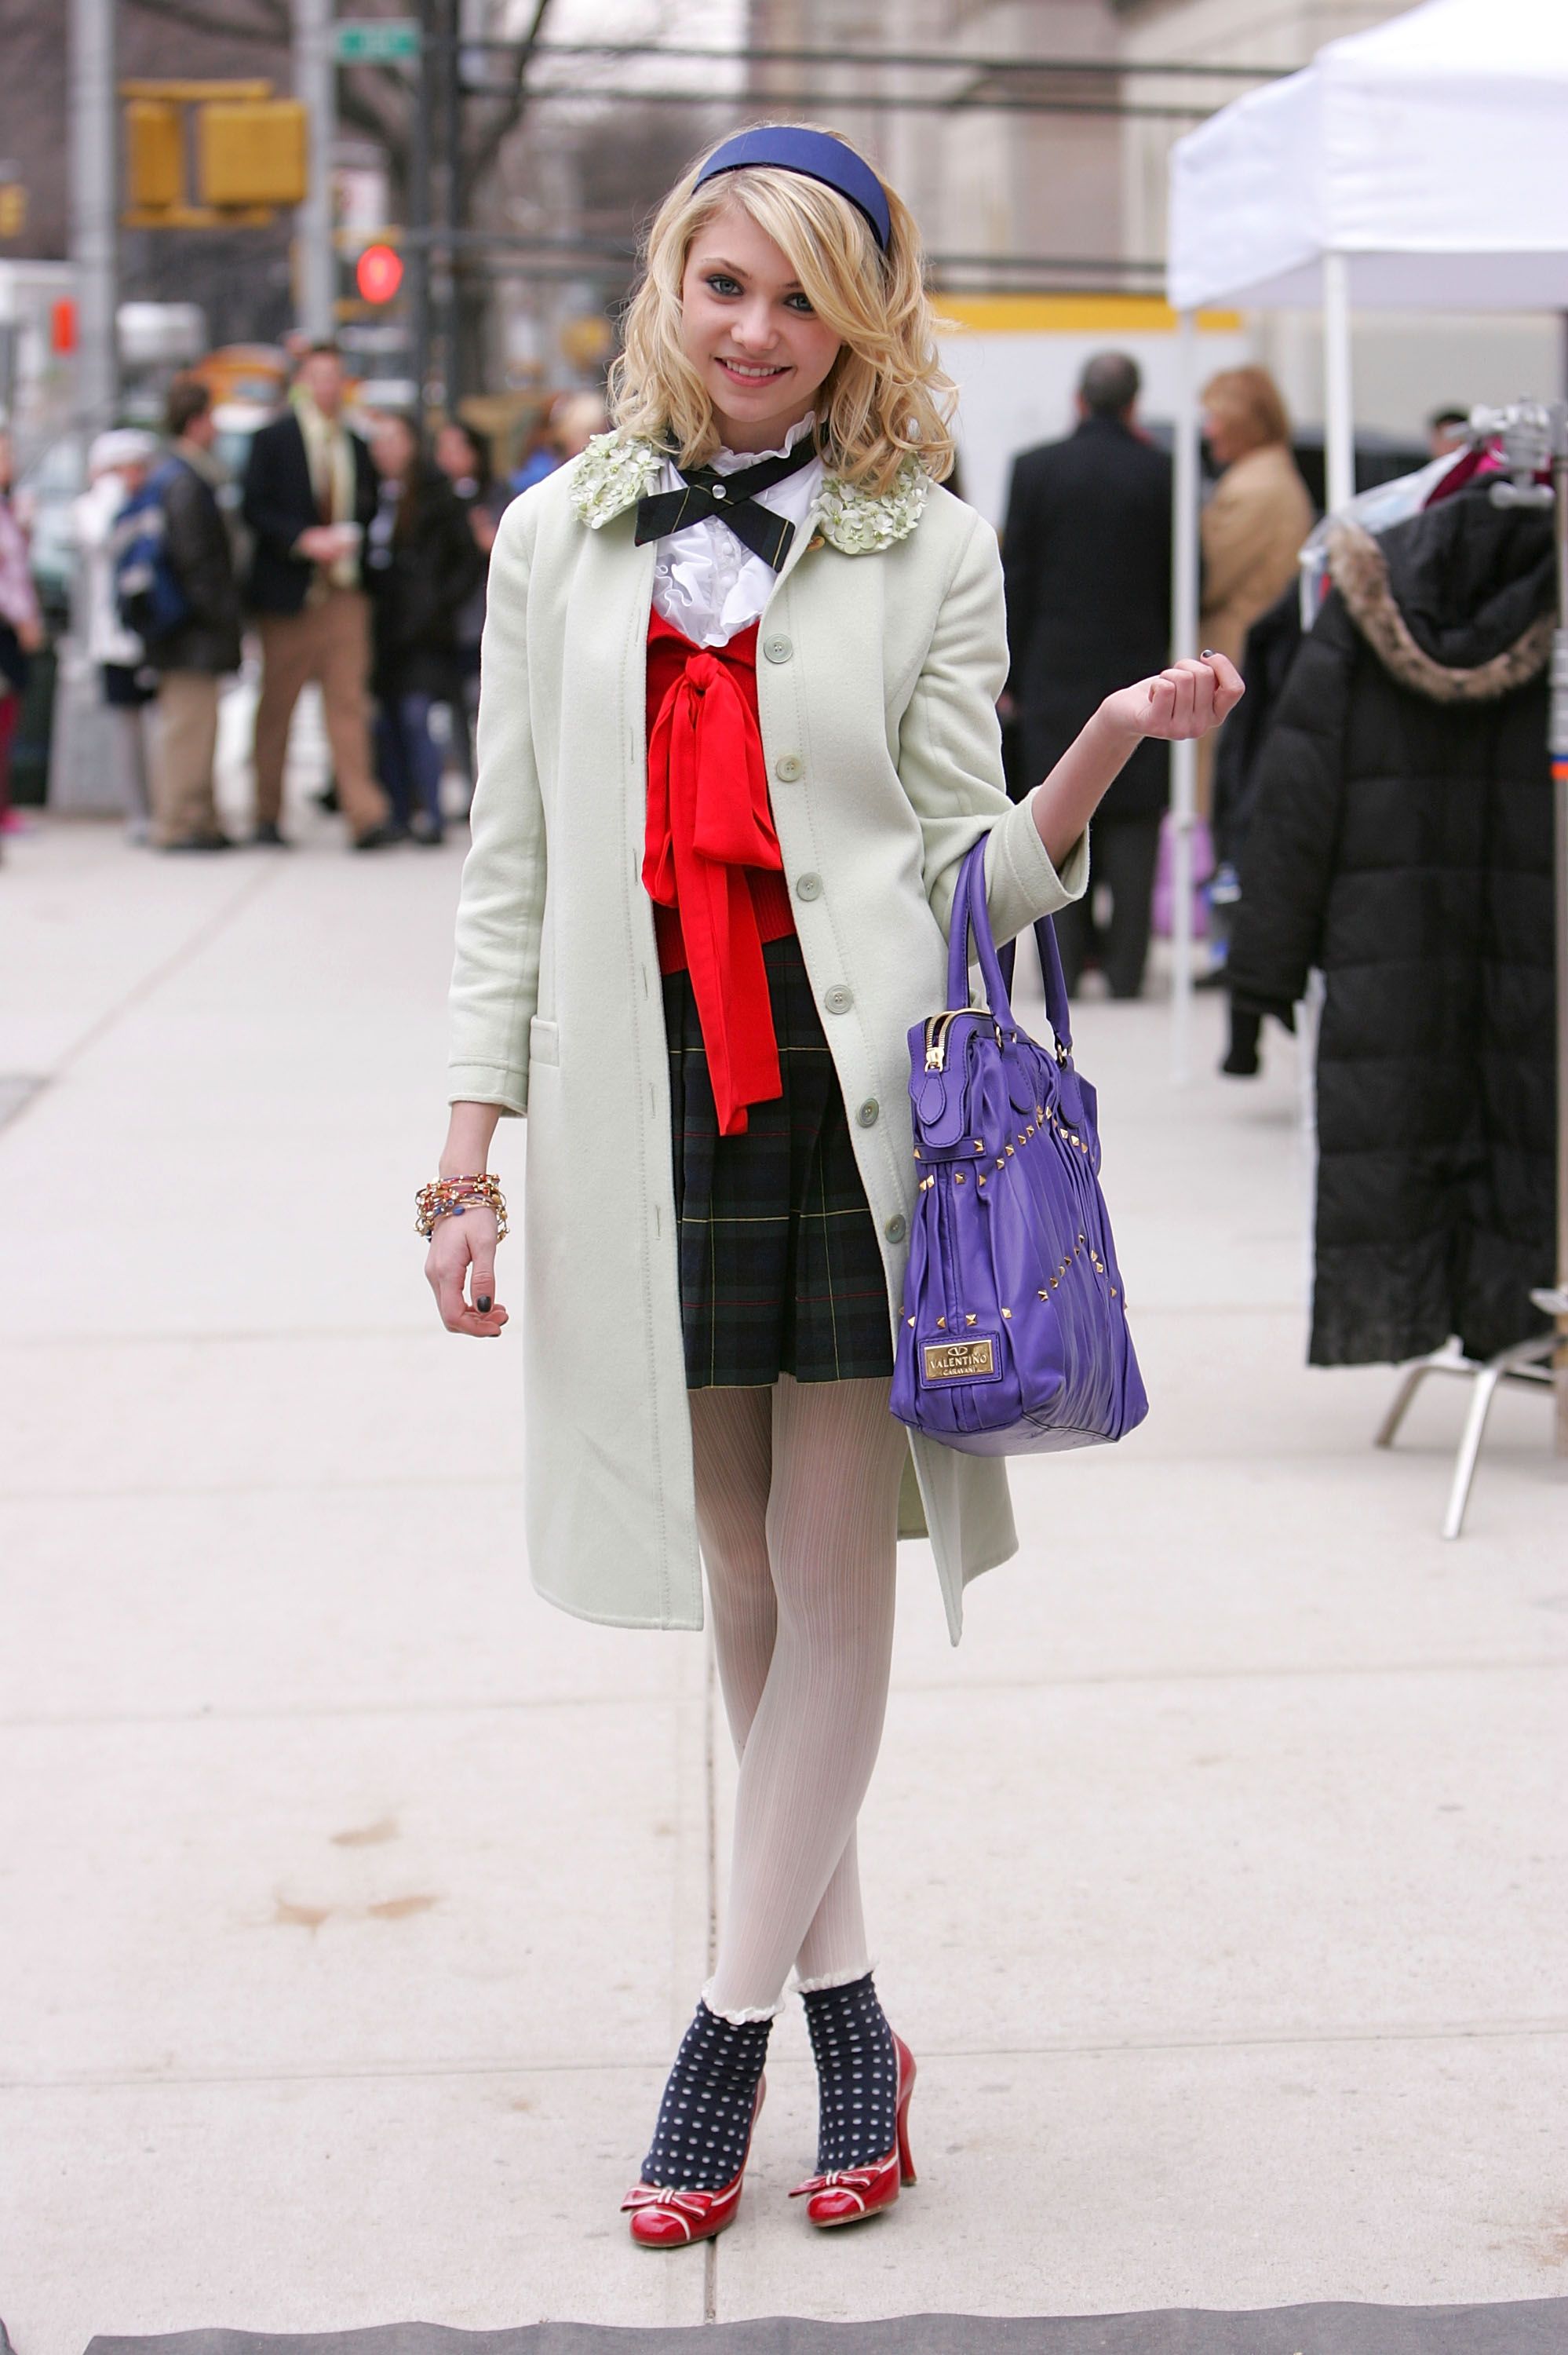 The Best Gossip Girl Outfits Of All Time